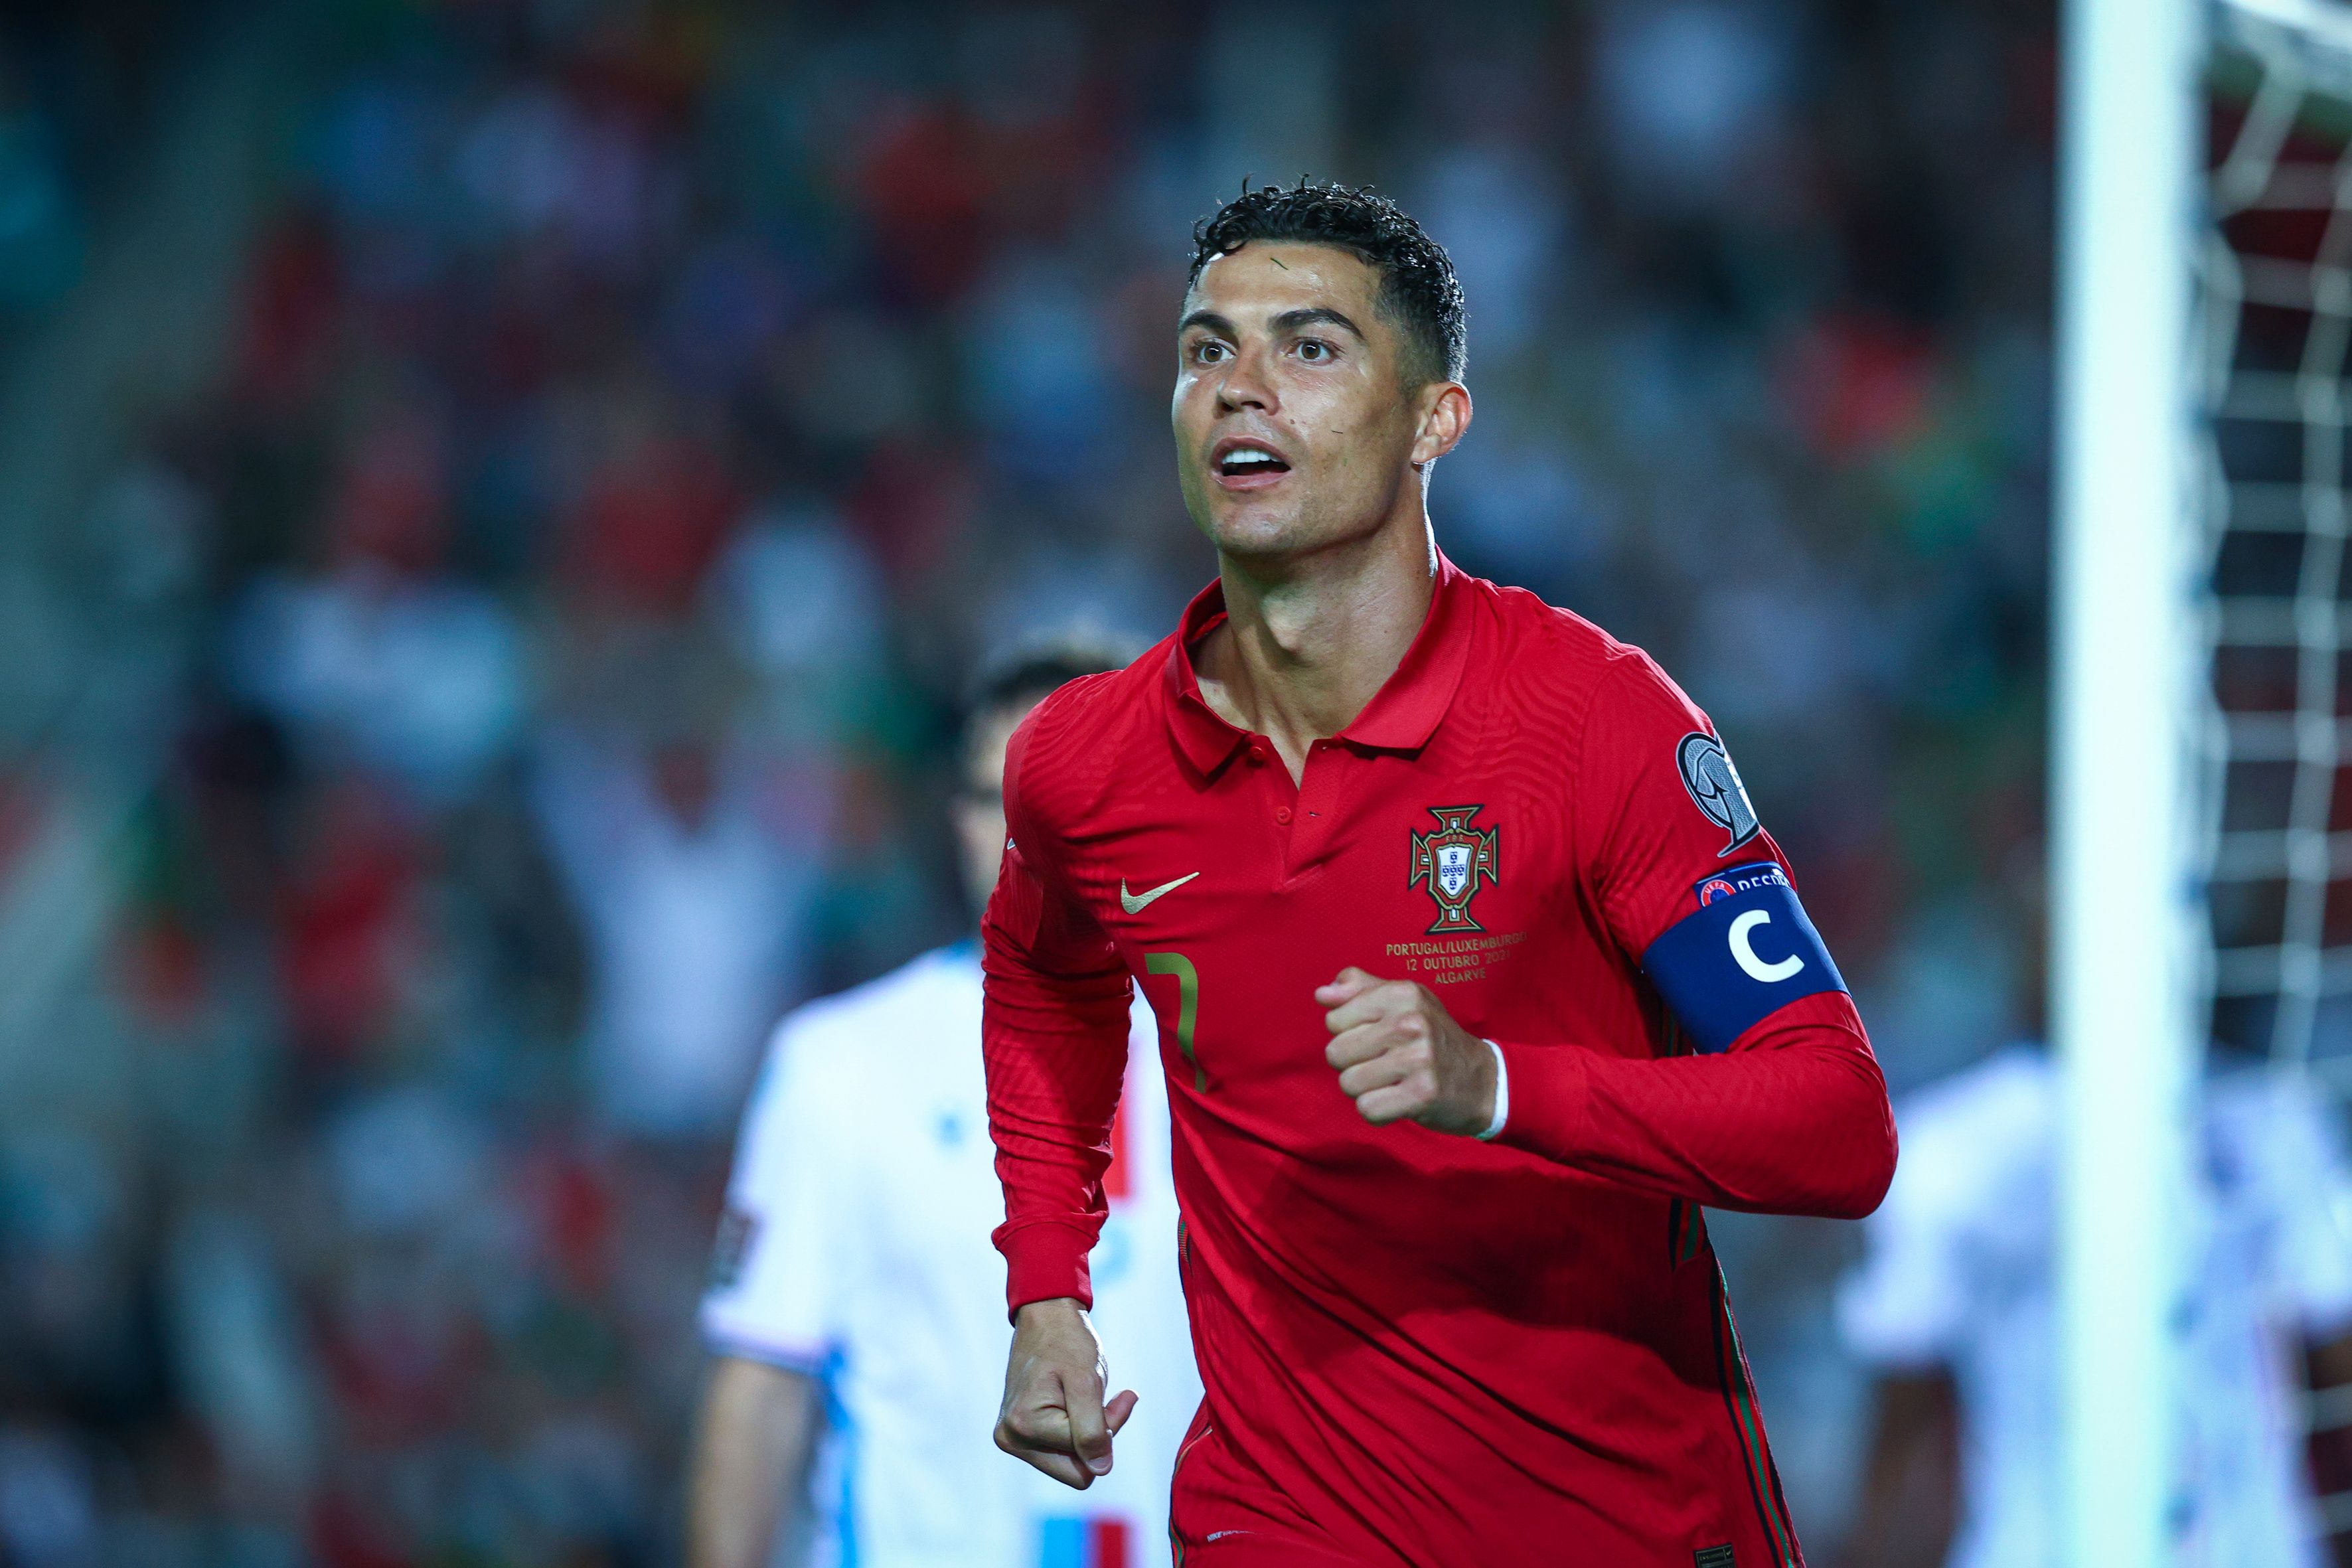 Ronaldo will be hoping to impress at the 2022 World Cup in Qatar